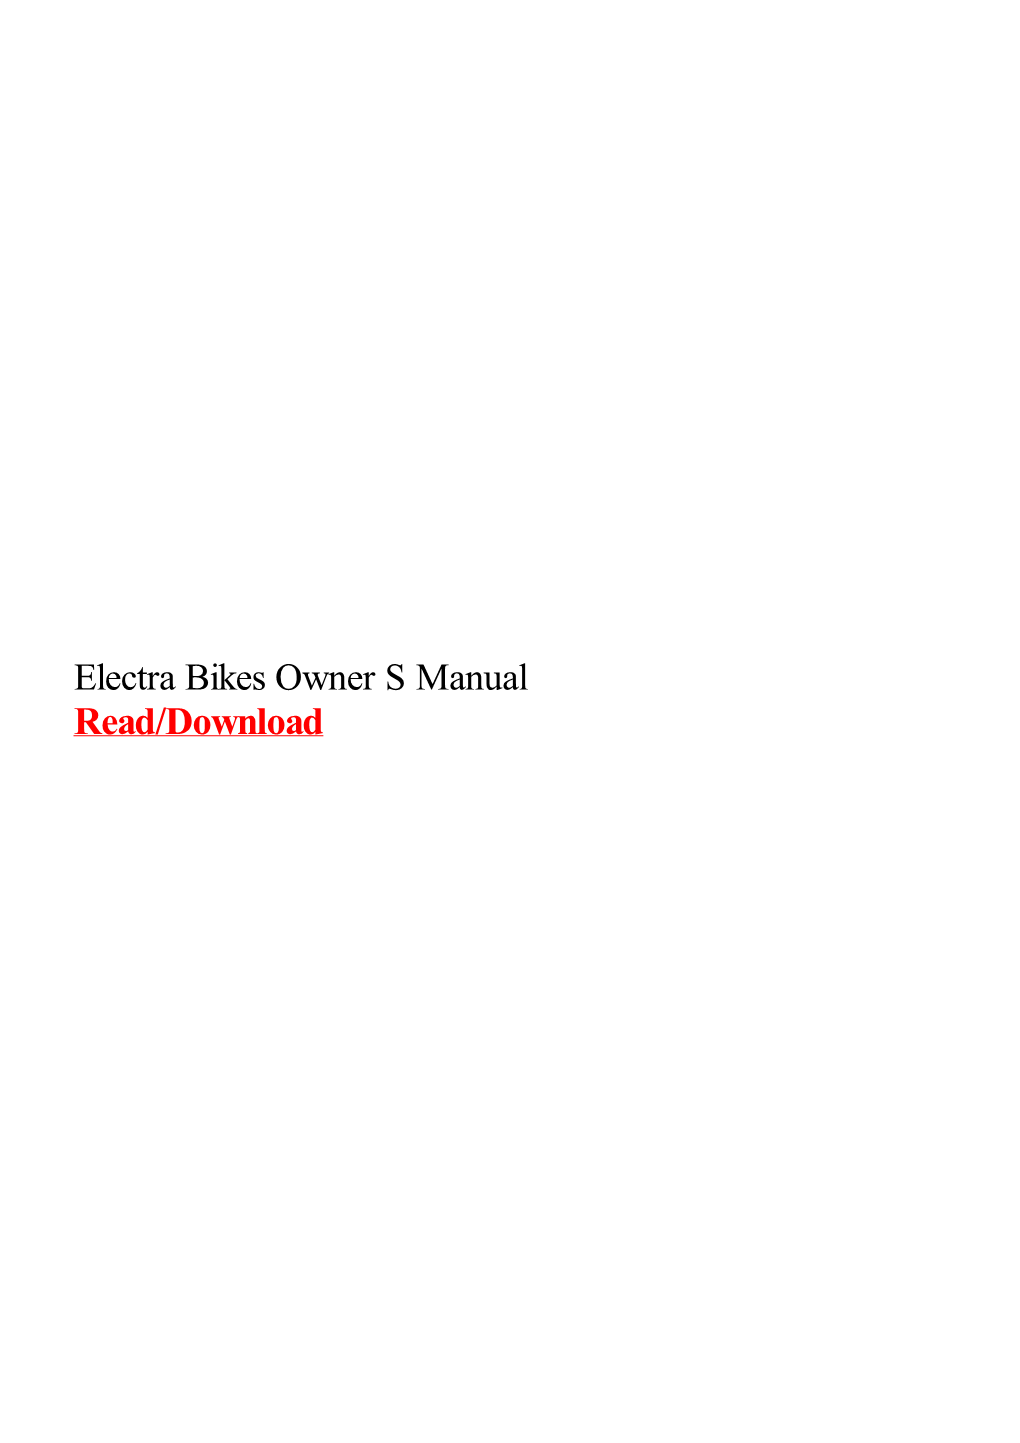 Electra Bikes Owner S Manual